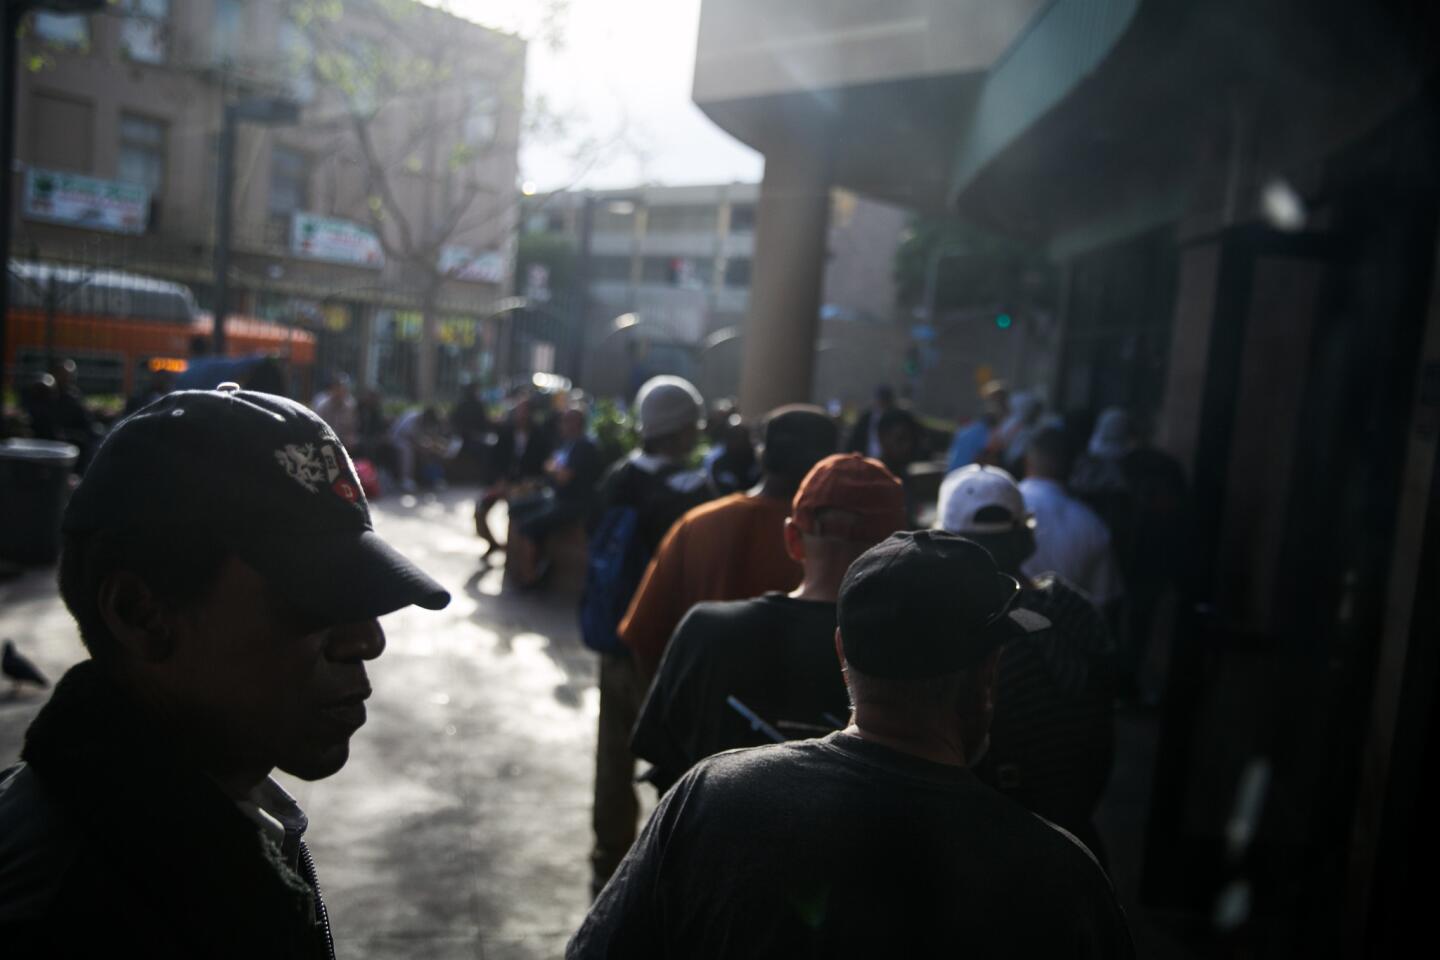 Homeless men line up outside the Los Angeles Mission seeking shelter. Charly Leundeu Keunang's death underscored how skid row remains a minefield for police and homeless people.